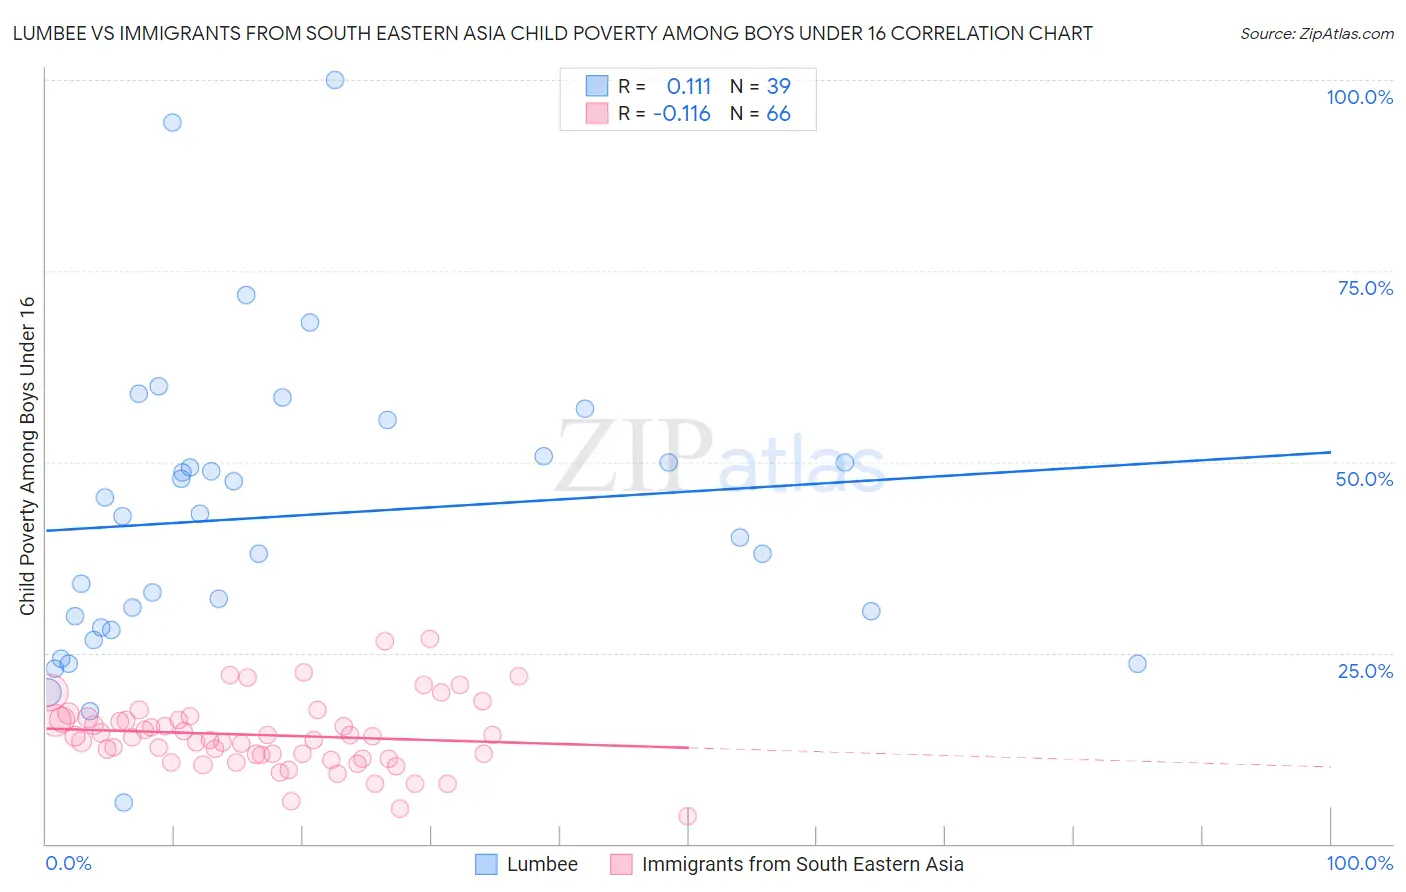 Lumbee vs Immigrants from South Eastern Asia Child Poverty Among Boys Under 16